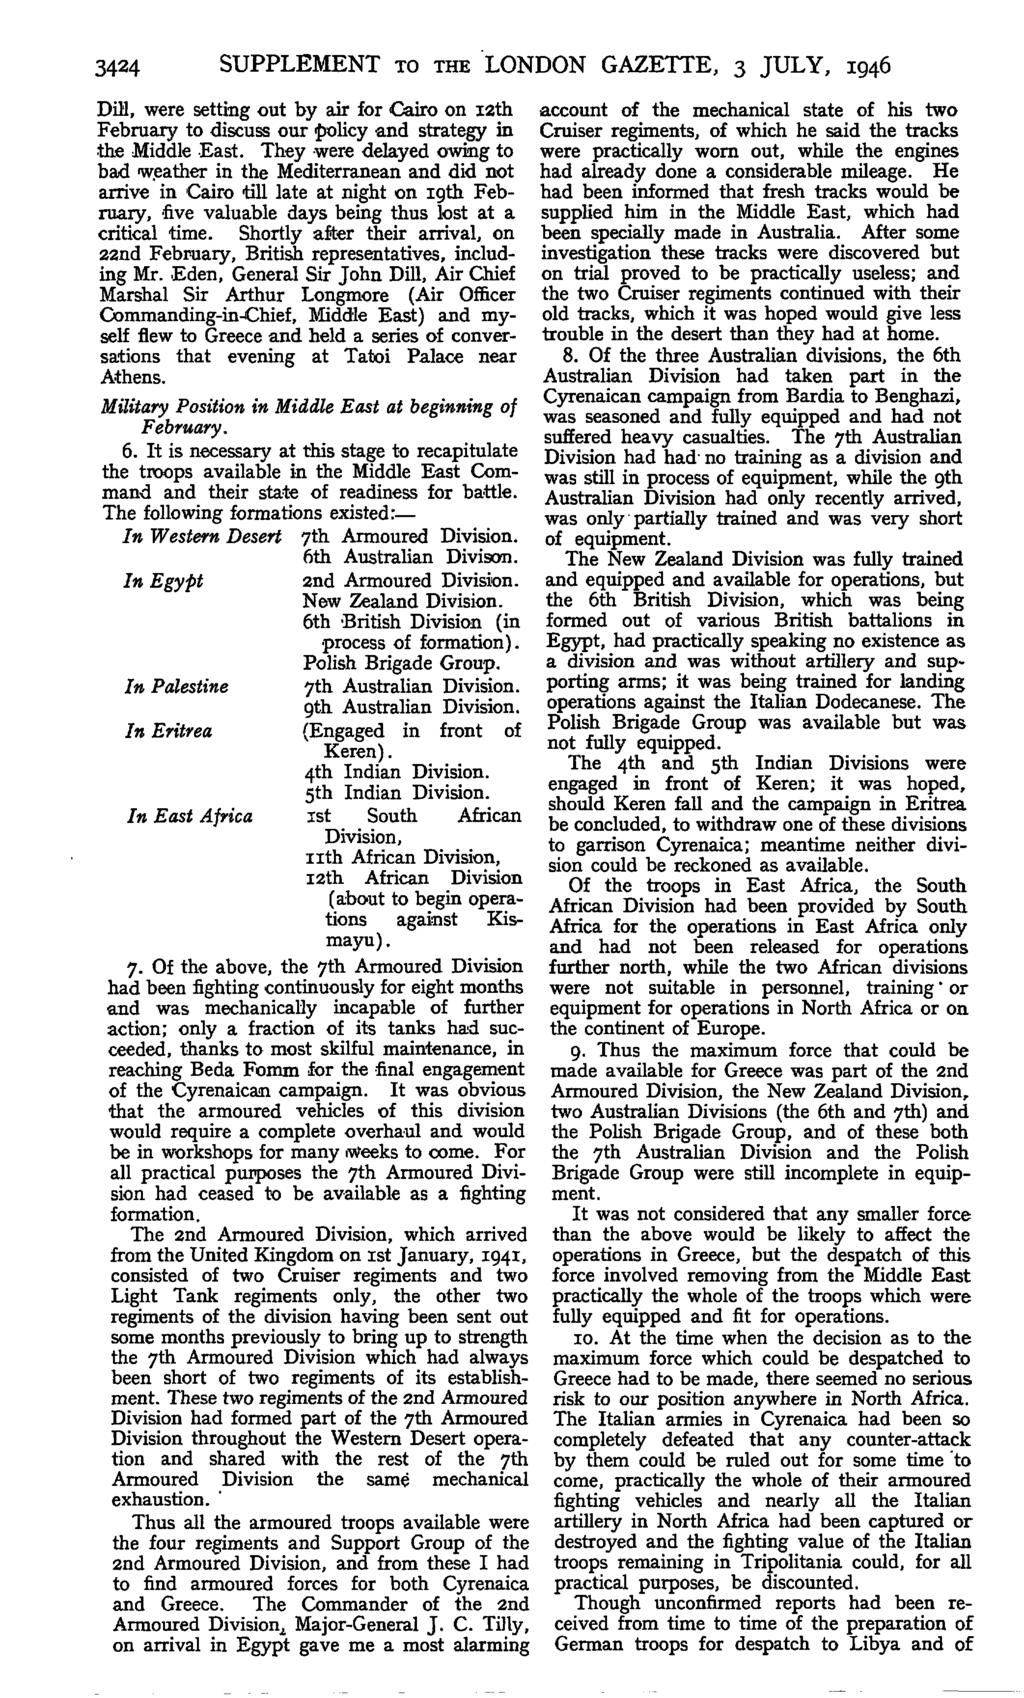 3424 SUPPLEMENT TO THE LONDON GAZETTE, 3 JULY, 1946 Dill, were setting out by air for Cairo on I2th February to discuss our policy and strategy in the Middle East.